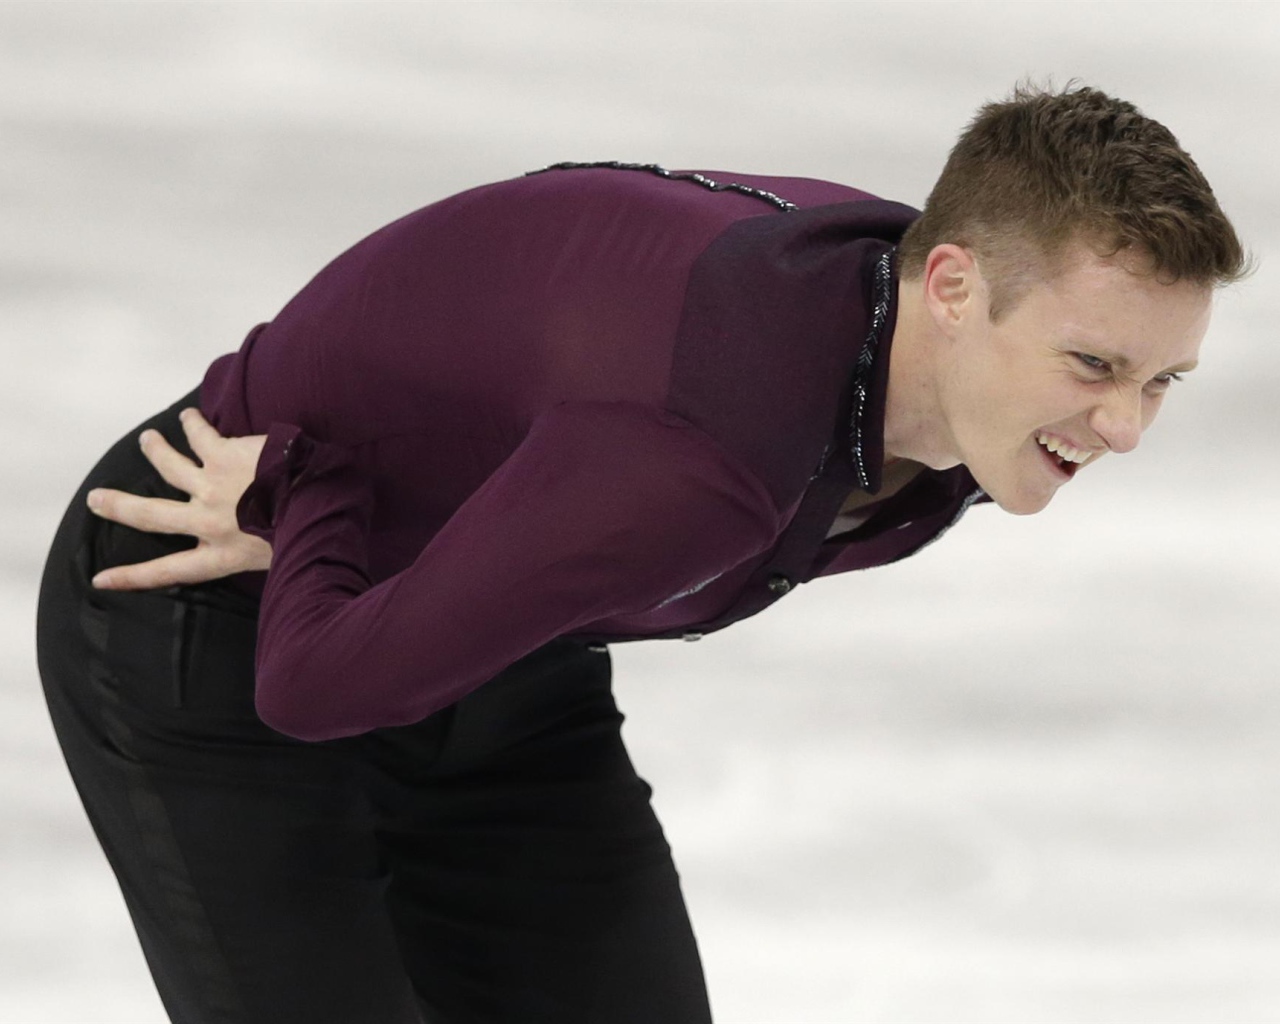 Bronze medalist in the discipline of figure skating Jeremy Abbott at the Olympics in Sochi